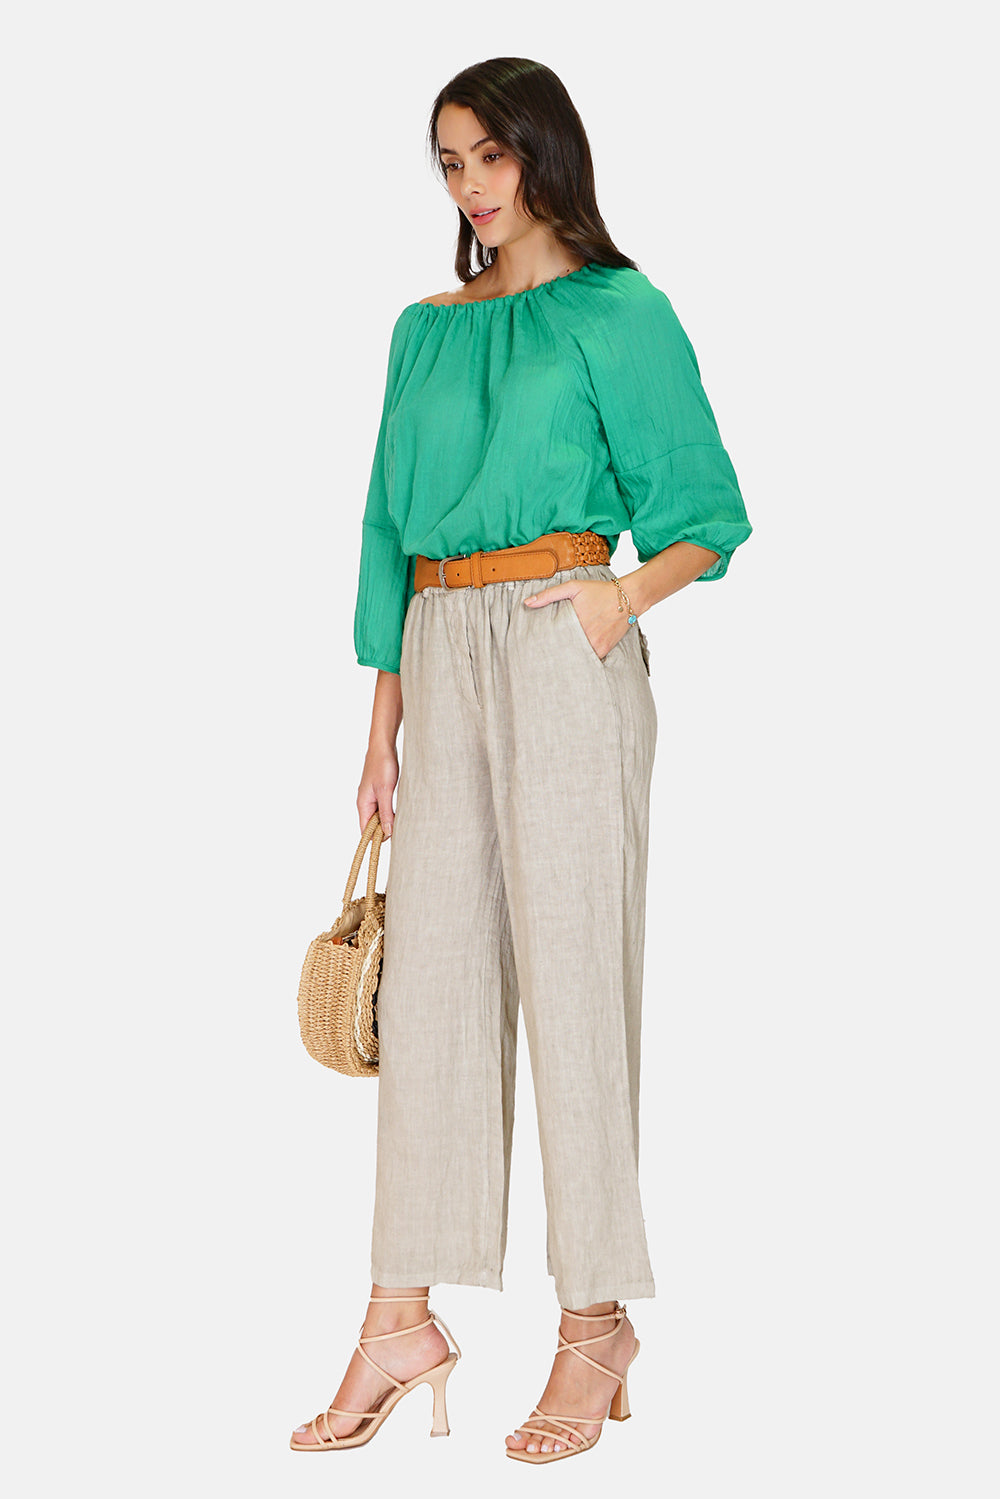 Wide pants, folded front and back, elastic waistband, high waist